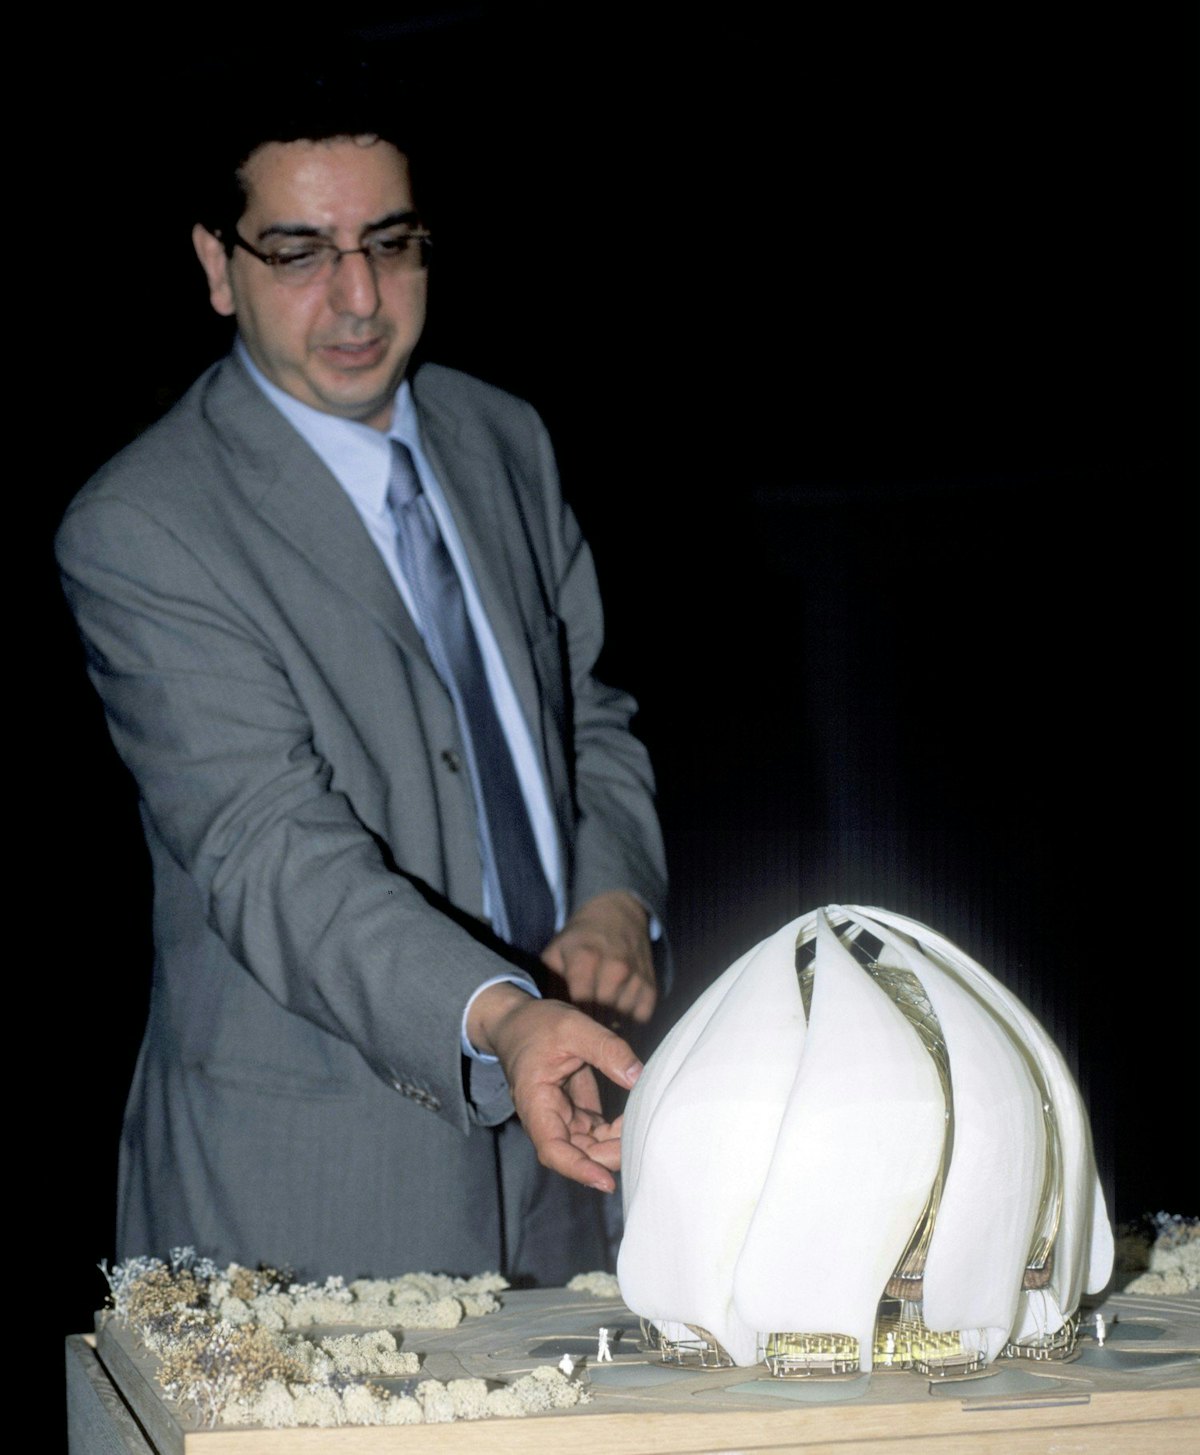 Architect of the Baha'i Temple to be built in Chile, Siamak Hariri, with a model of the building.